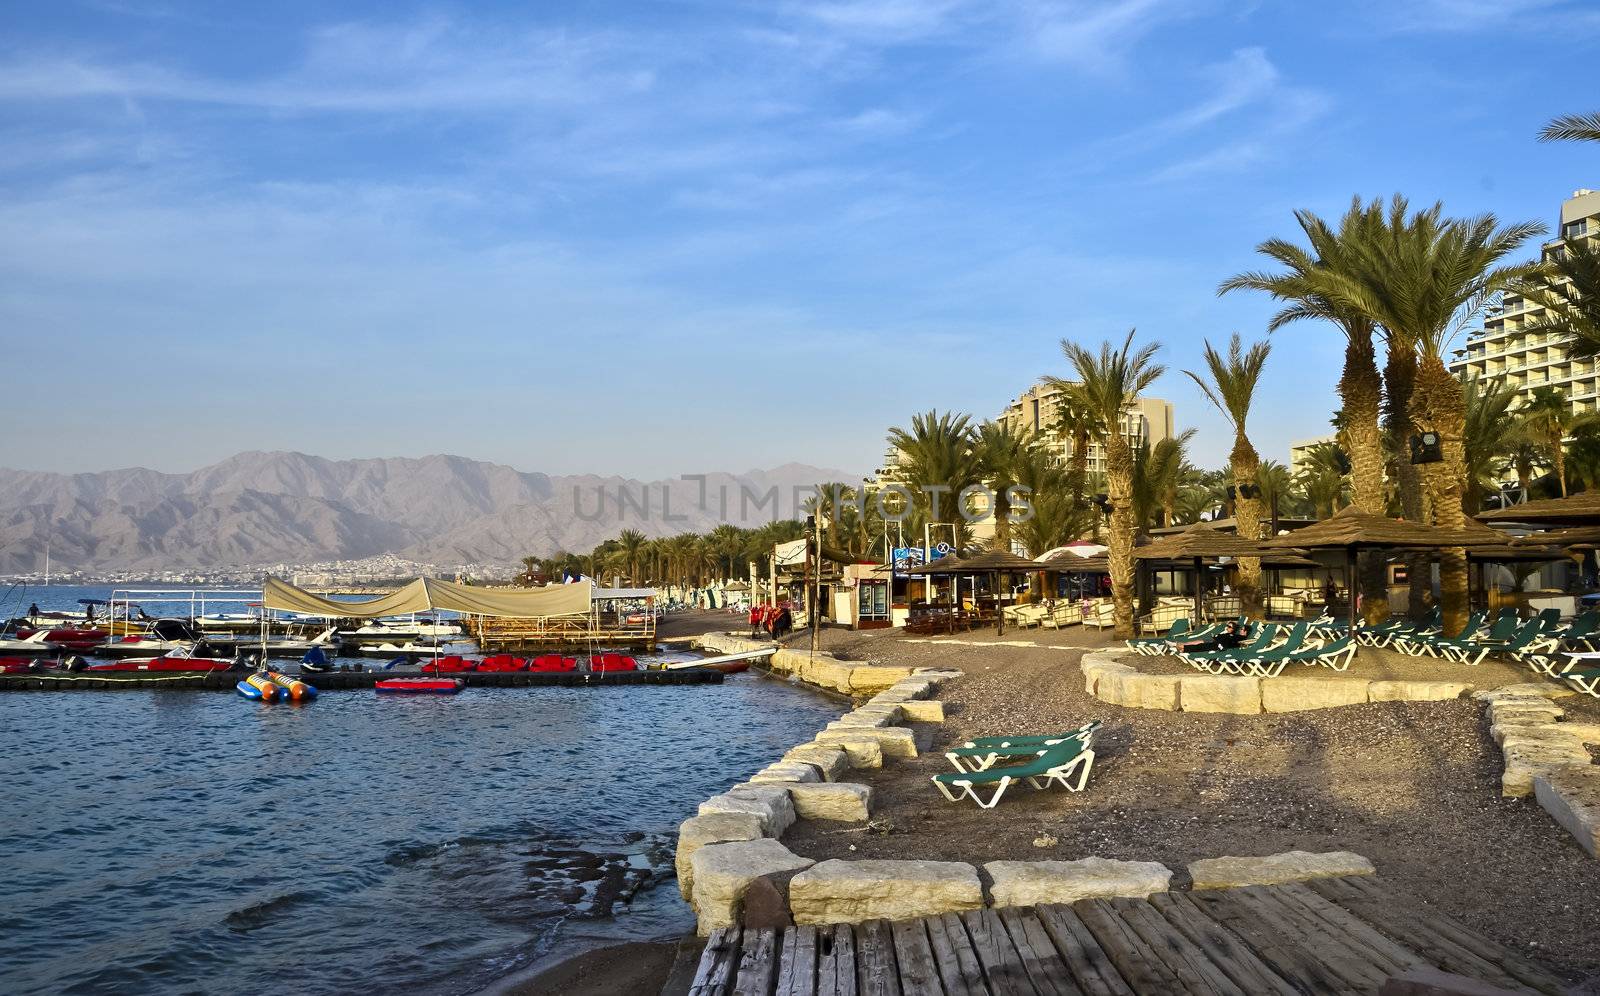 View on the northern beach of Eilat, Israel by Gorshkov13